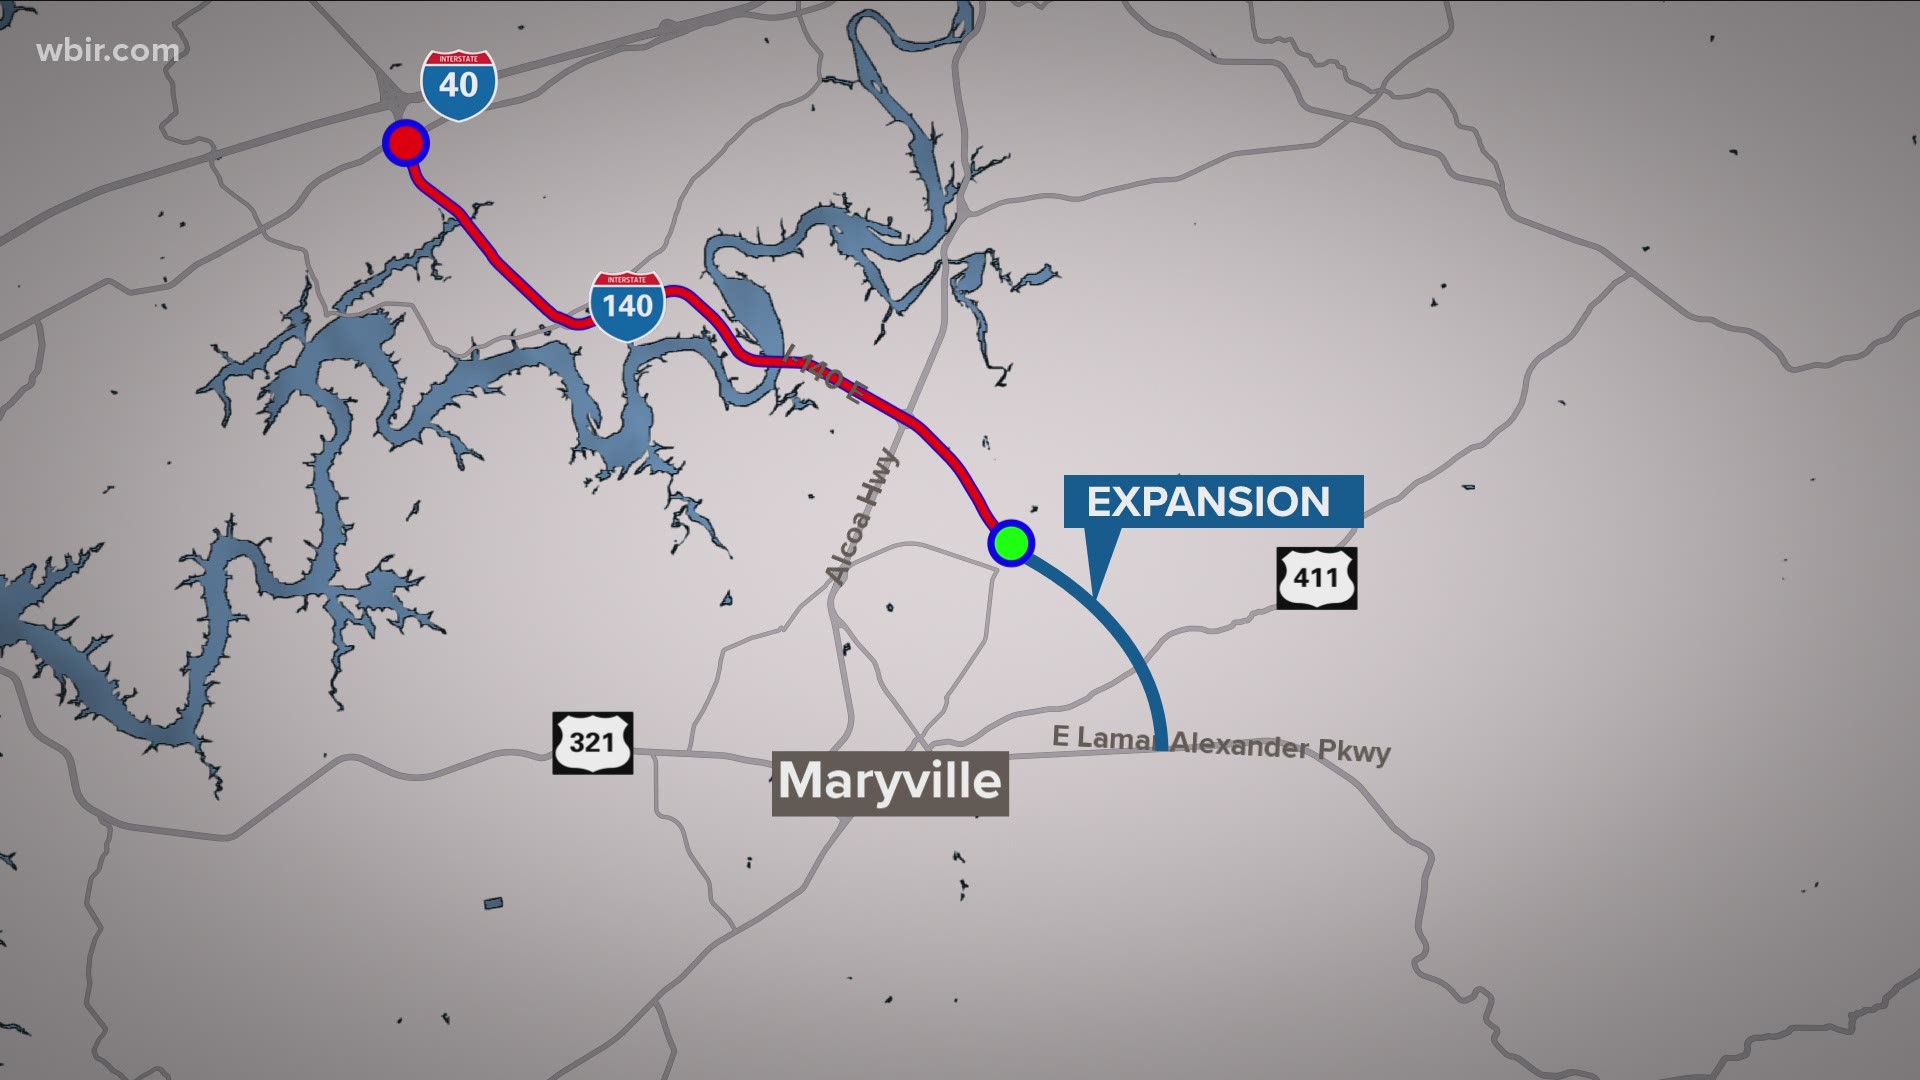 Blount County leaders said landowners felt alienated from conversations about plans to extend Pellissippi Parkway, connecting it to Lamar Alexander Highway.